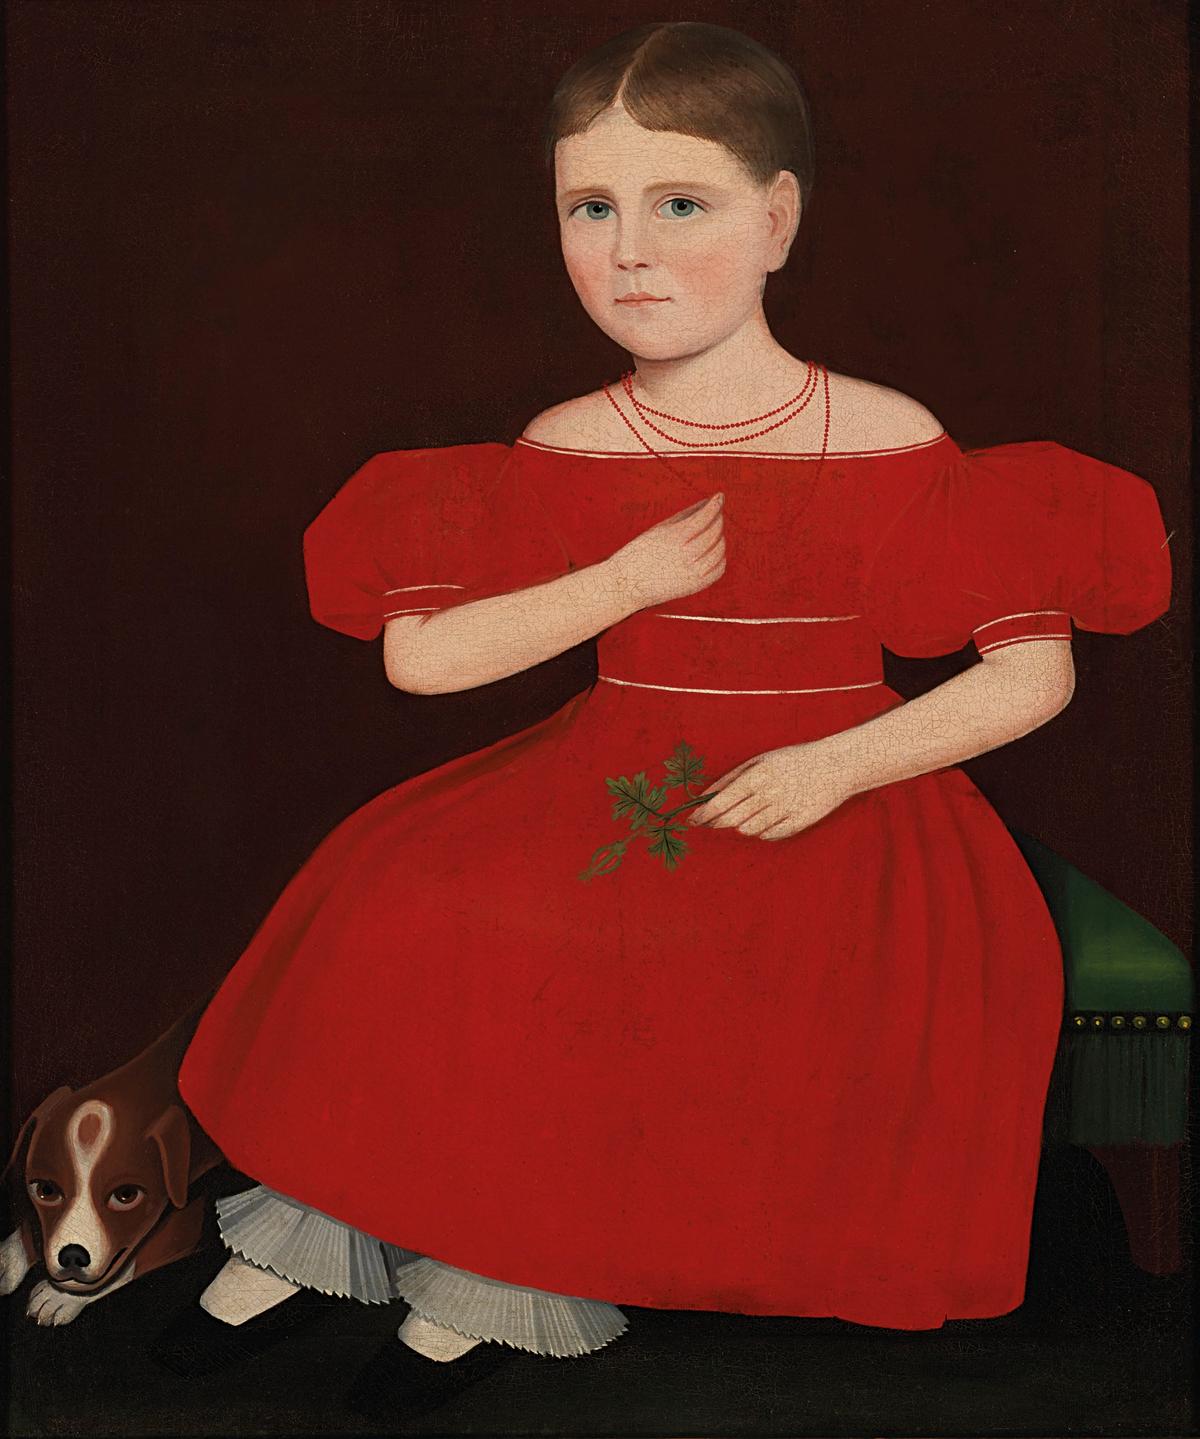 Furniture sales go to the dogs, but a dog painting by folk artist Ammi Phillips realised a record $1.7m at Christie's Americana sales. Christie's Images Ltd 2019